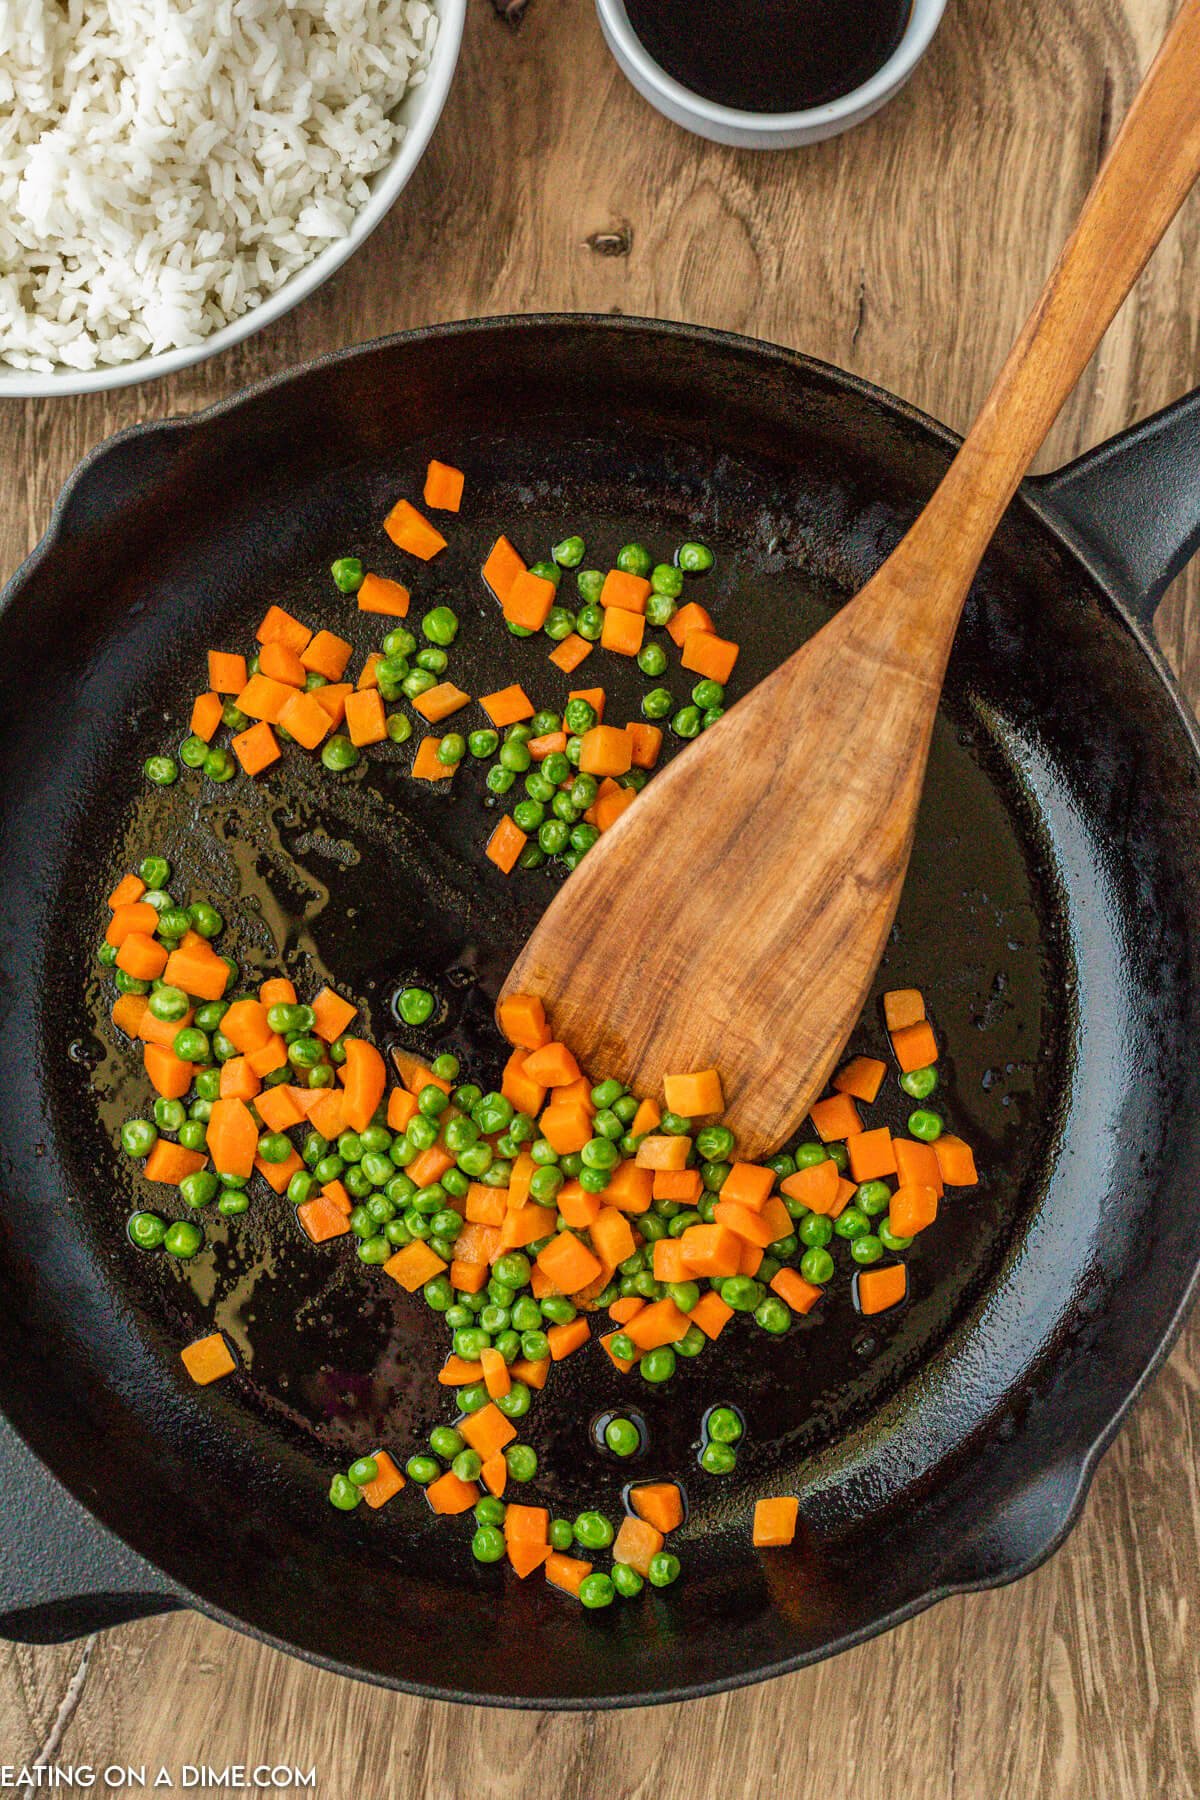 Cooking carrots and peas in a skillet